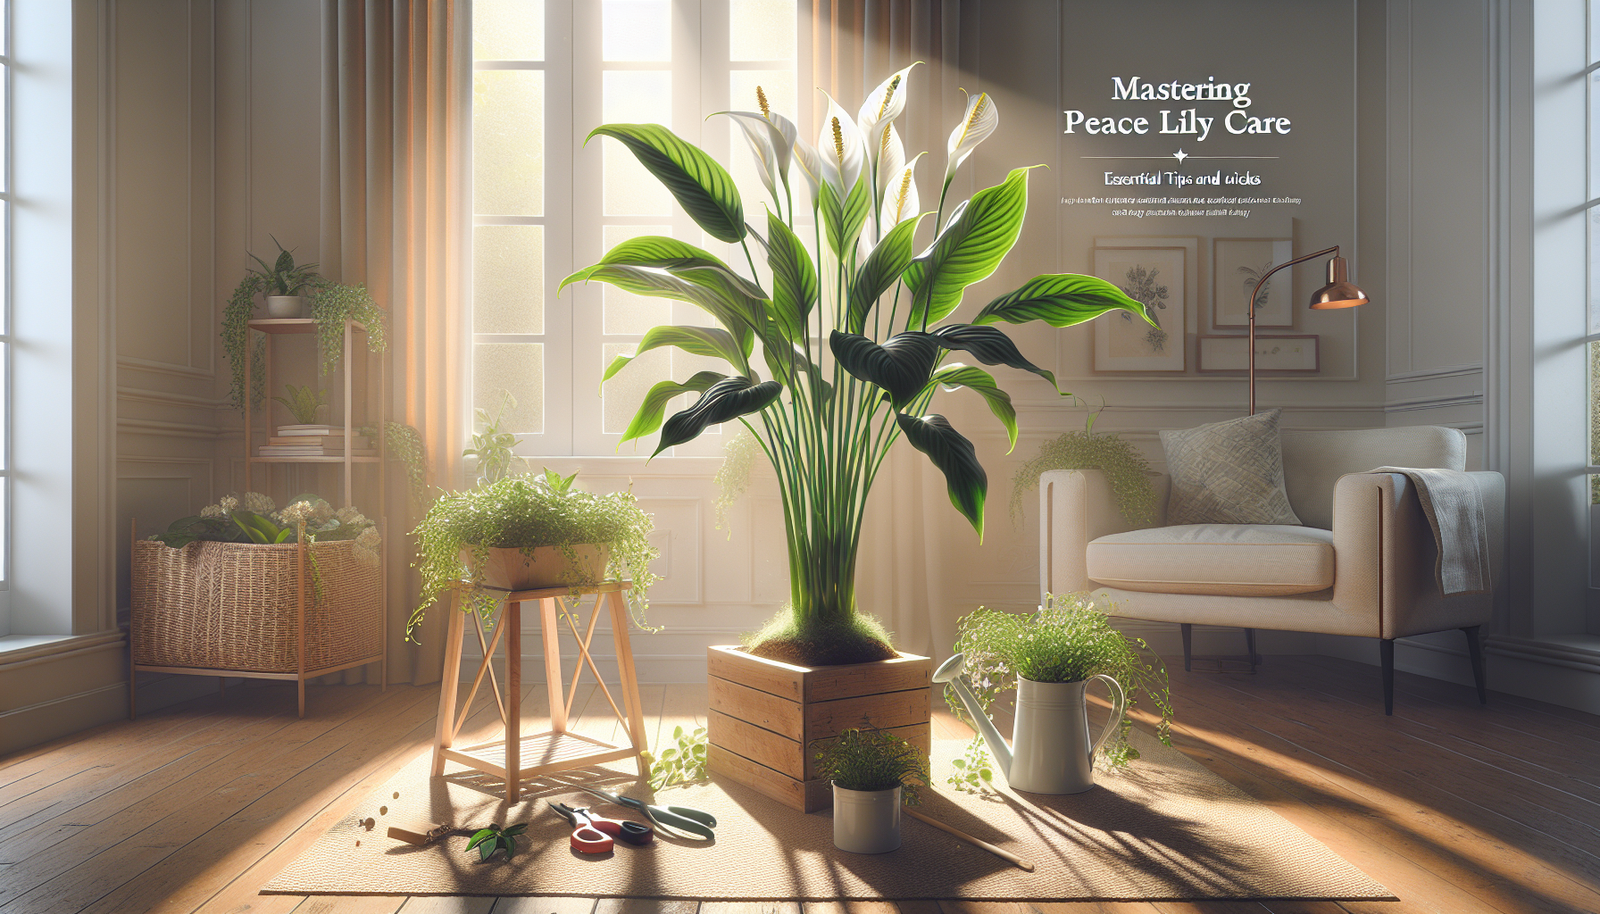 Mastering Peace Lily Care: Essential Tips and Tricks